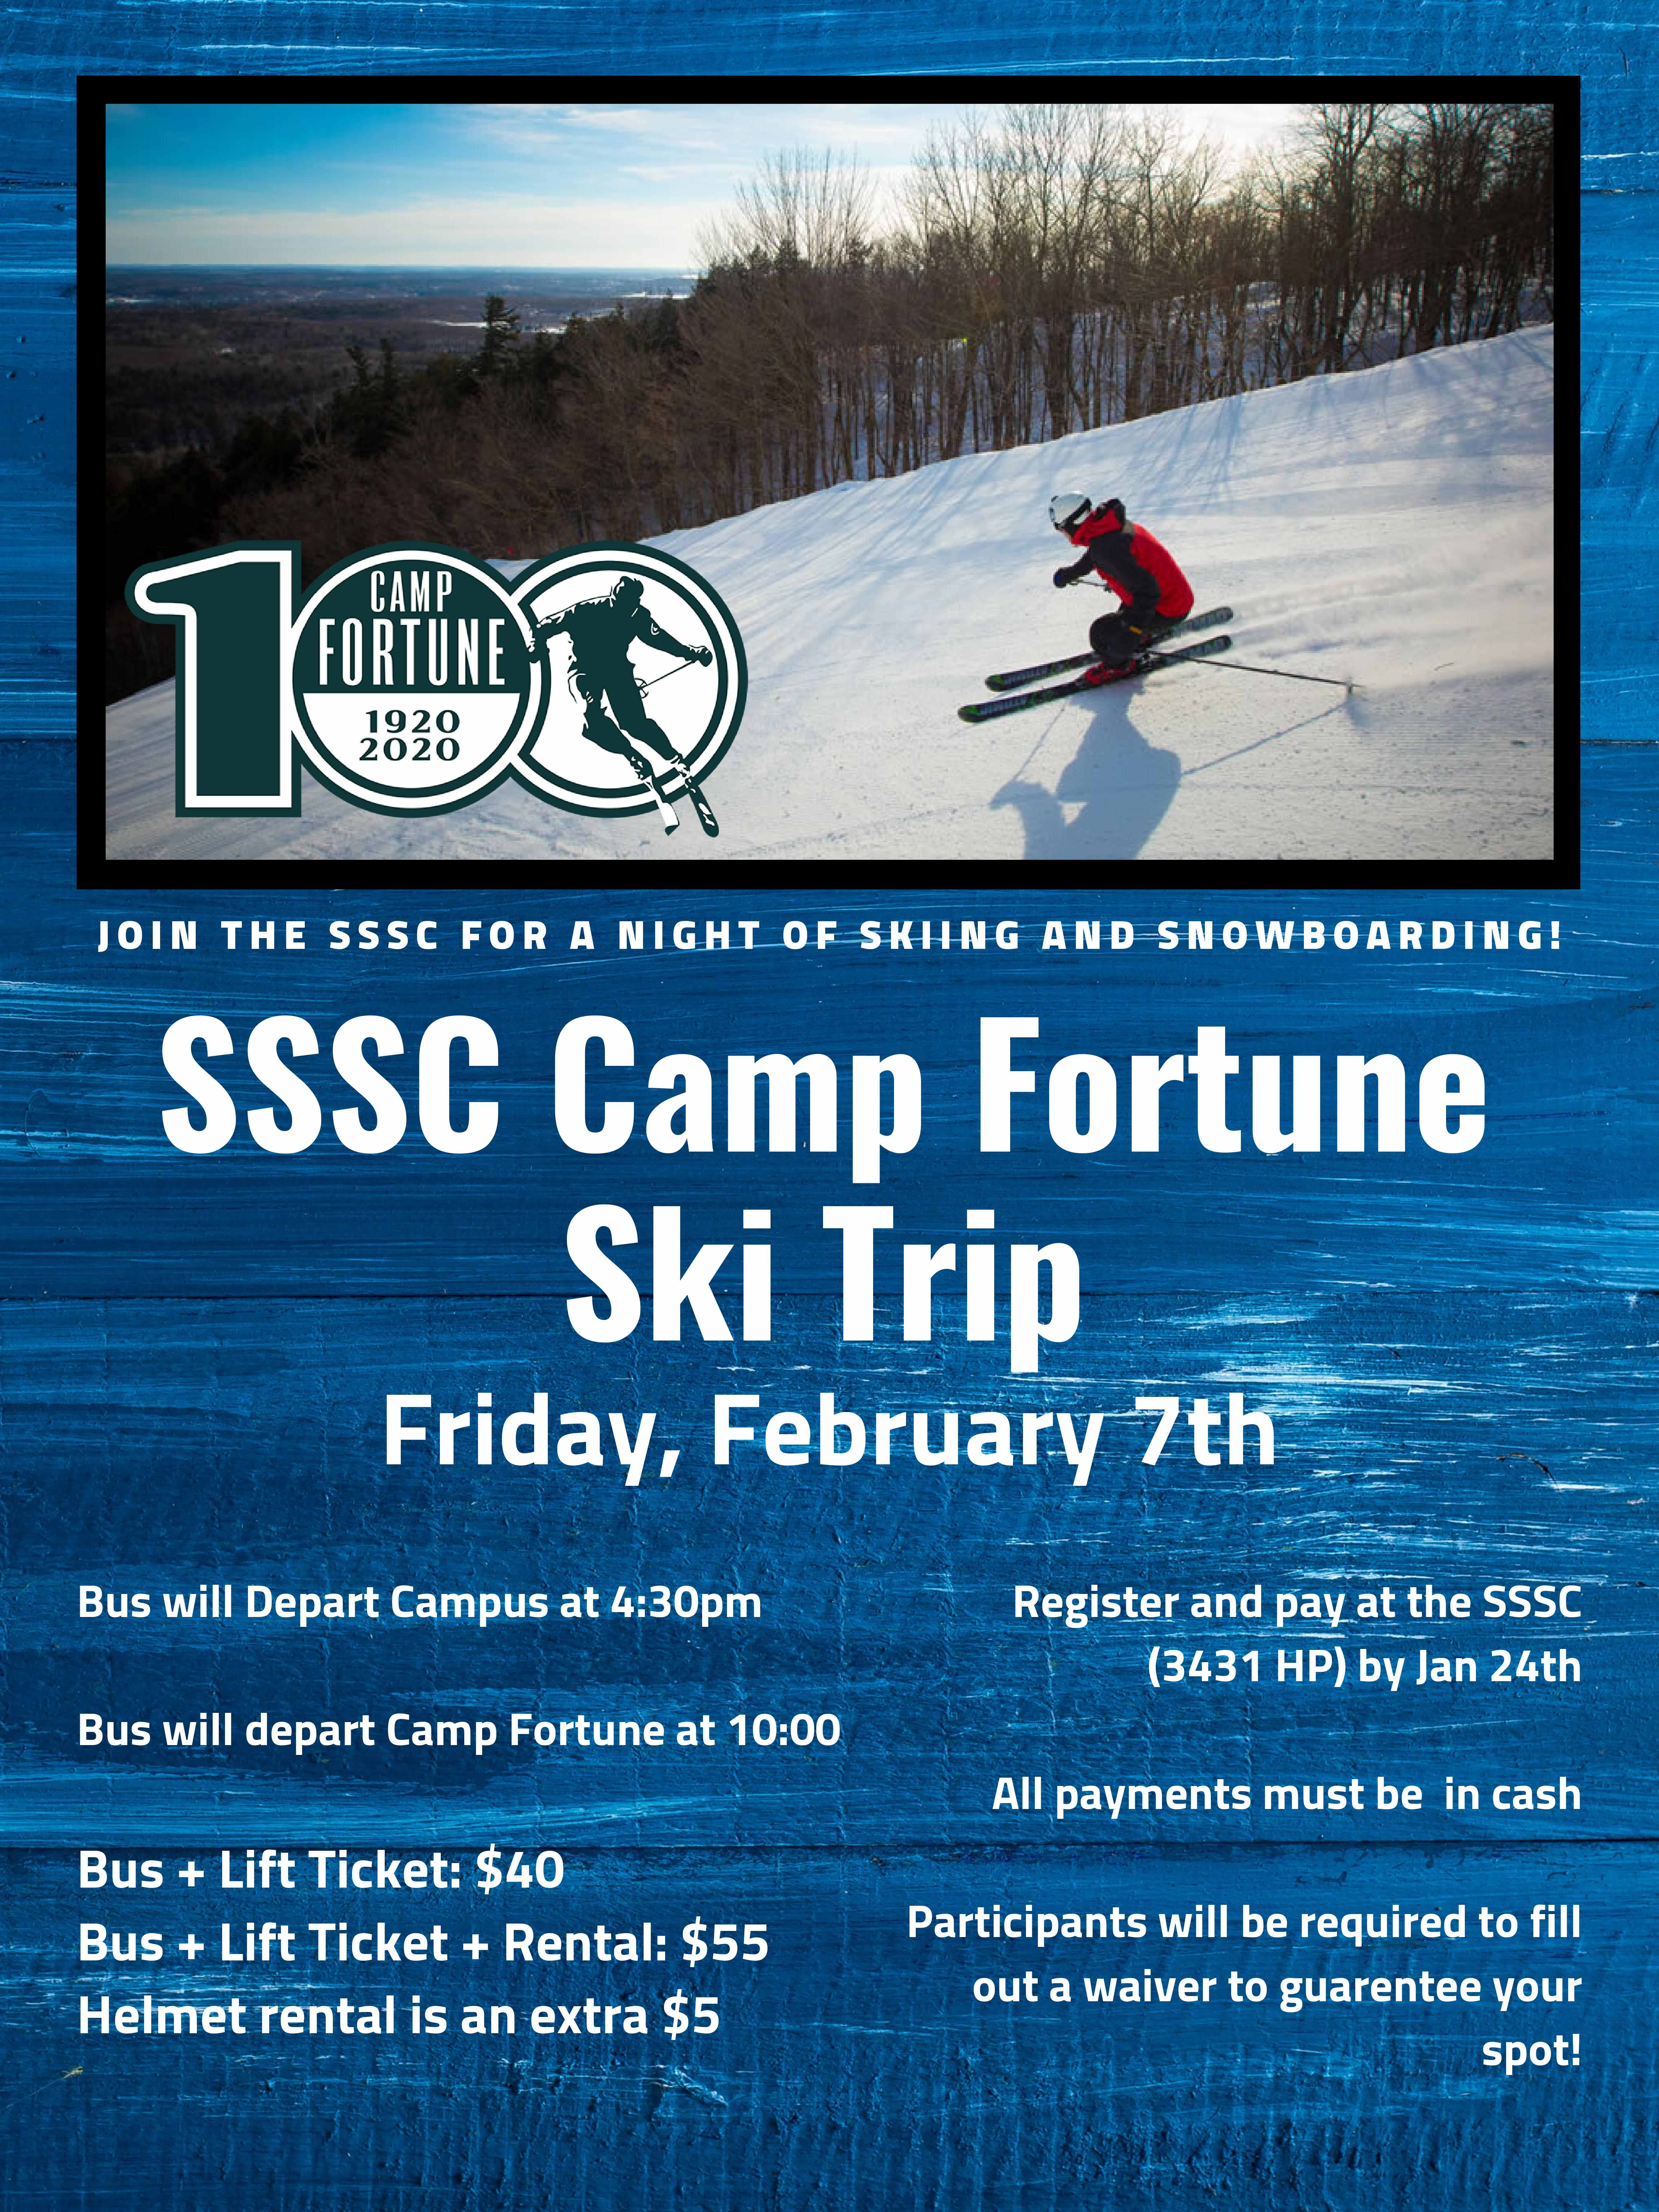 Poster for the SSSC Ski Trip to Camp Fortune on February 7th. If you have more questions please contact the SSSC